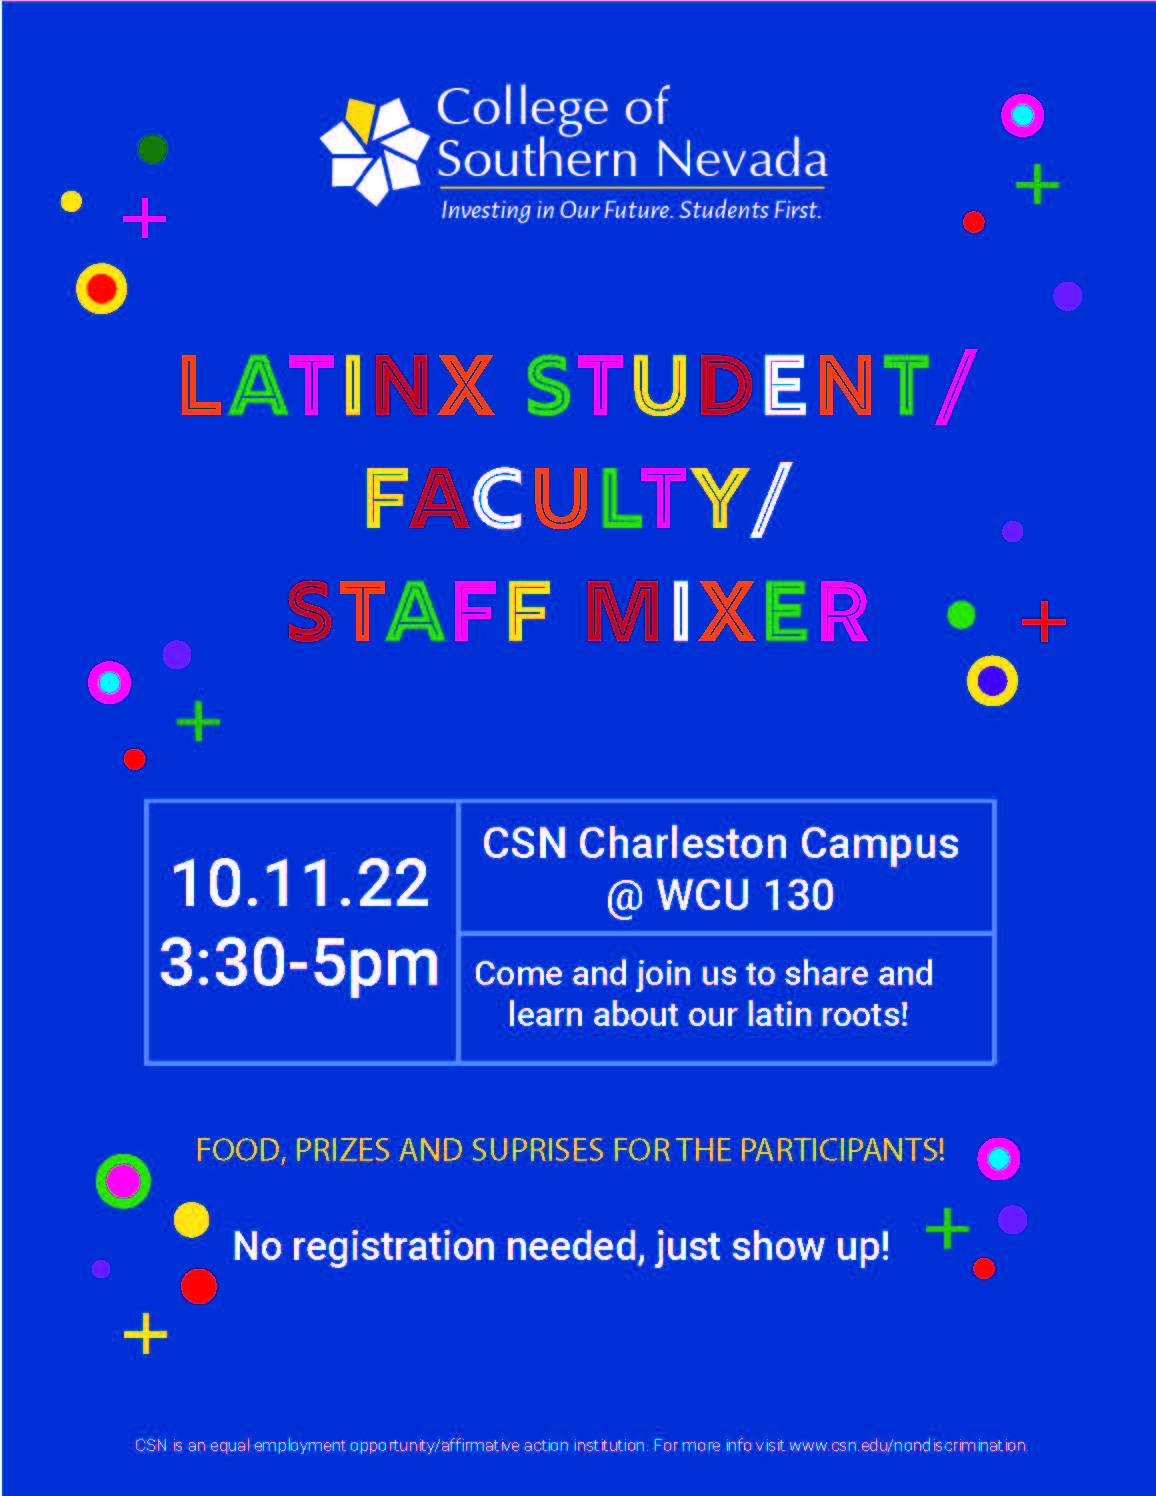 LatinX Student/Faculty/Staff Mixer on October 11, 2022